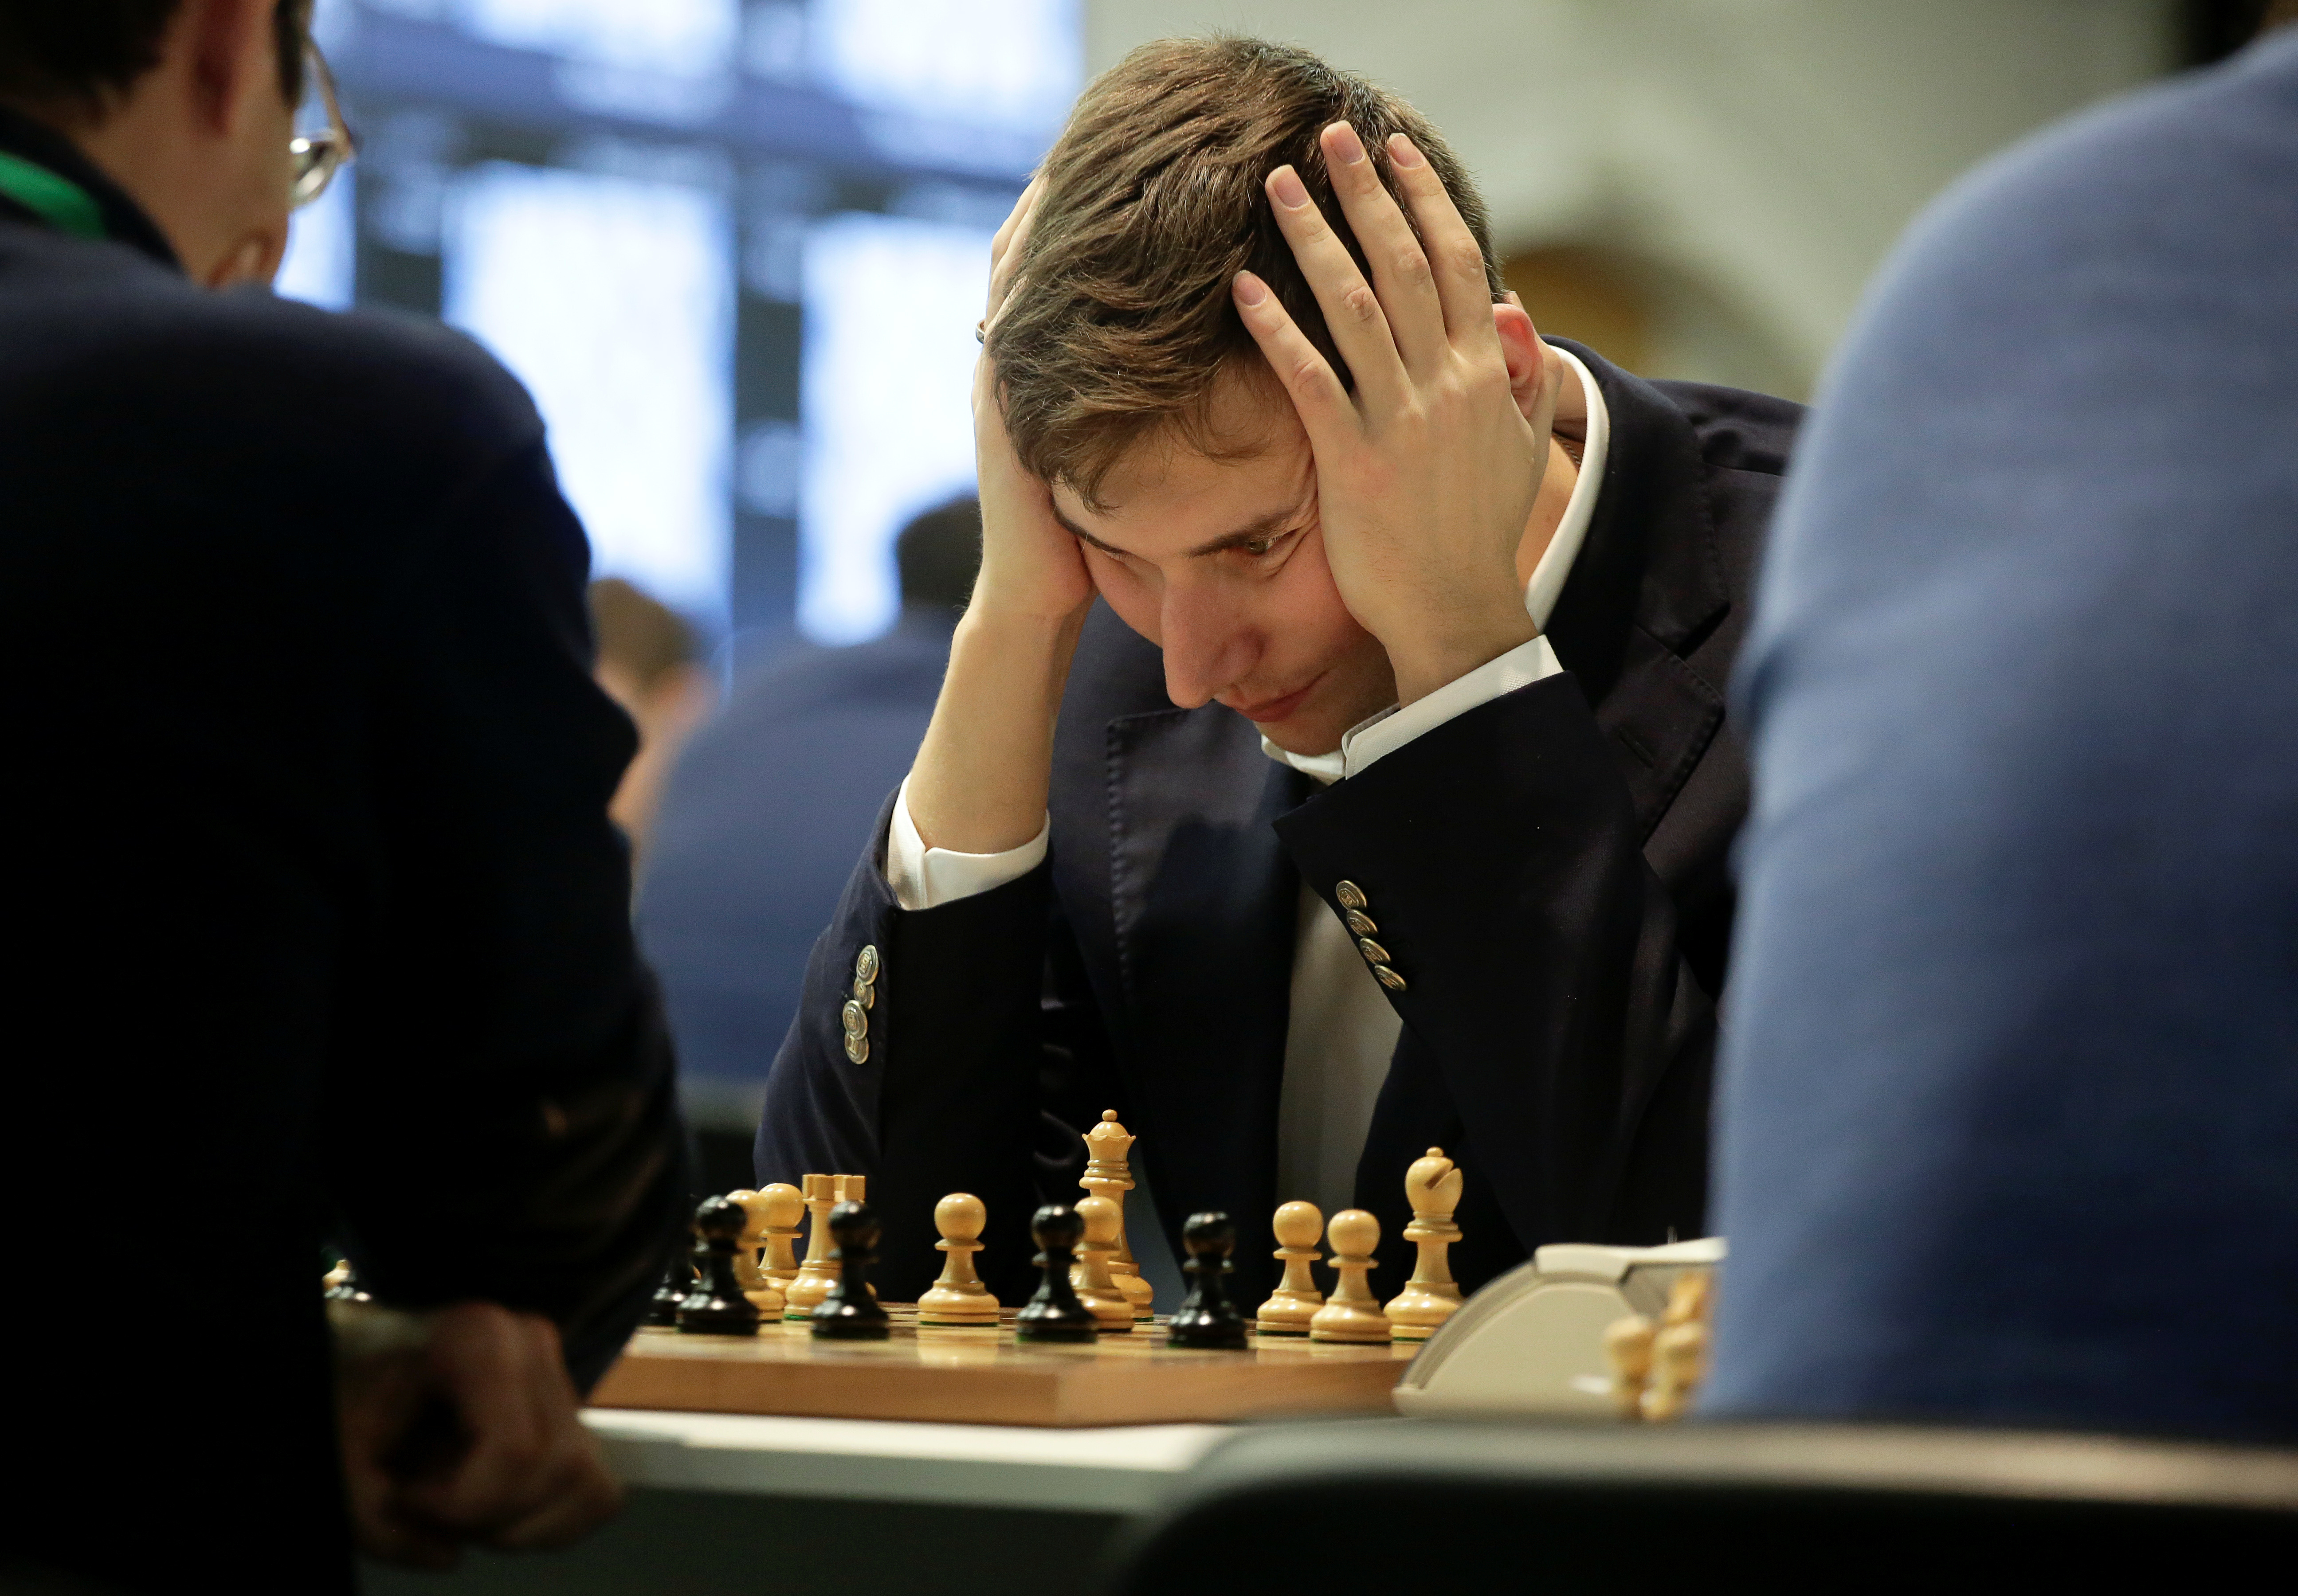 World Chess claims are highly inaccurate: FIDE